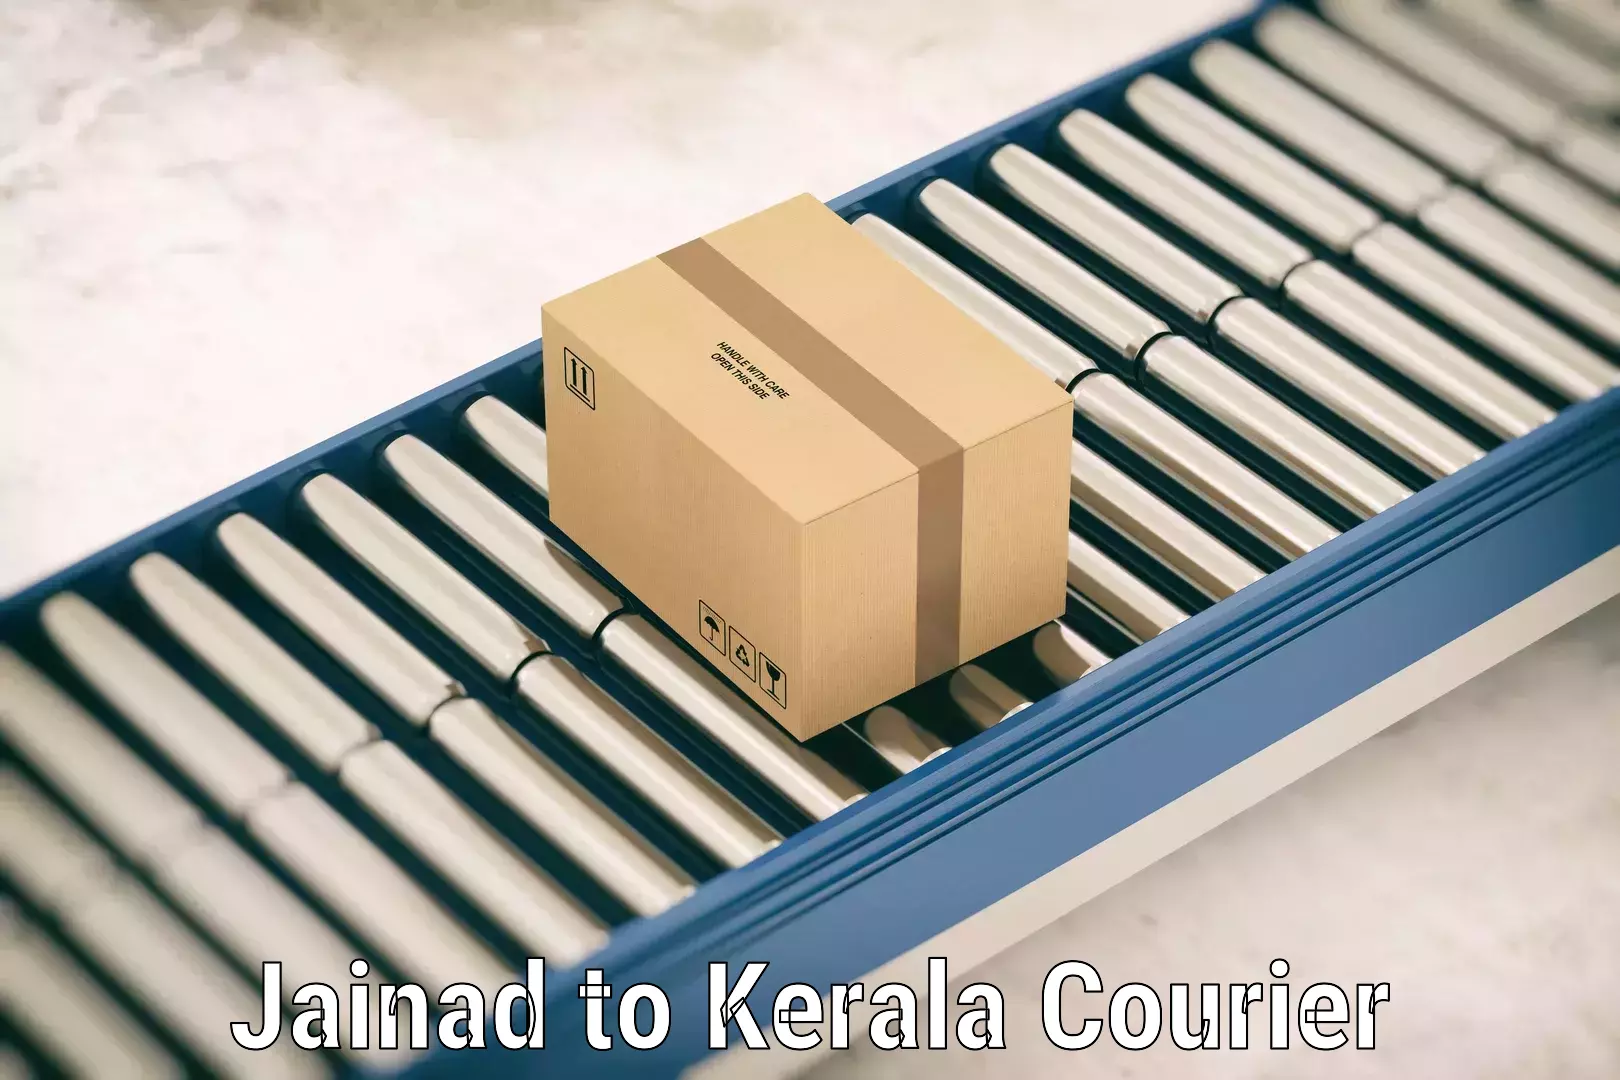 Baggage transport quote in Jainad to Cochin Port Kochi